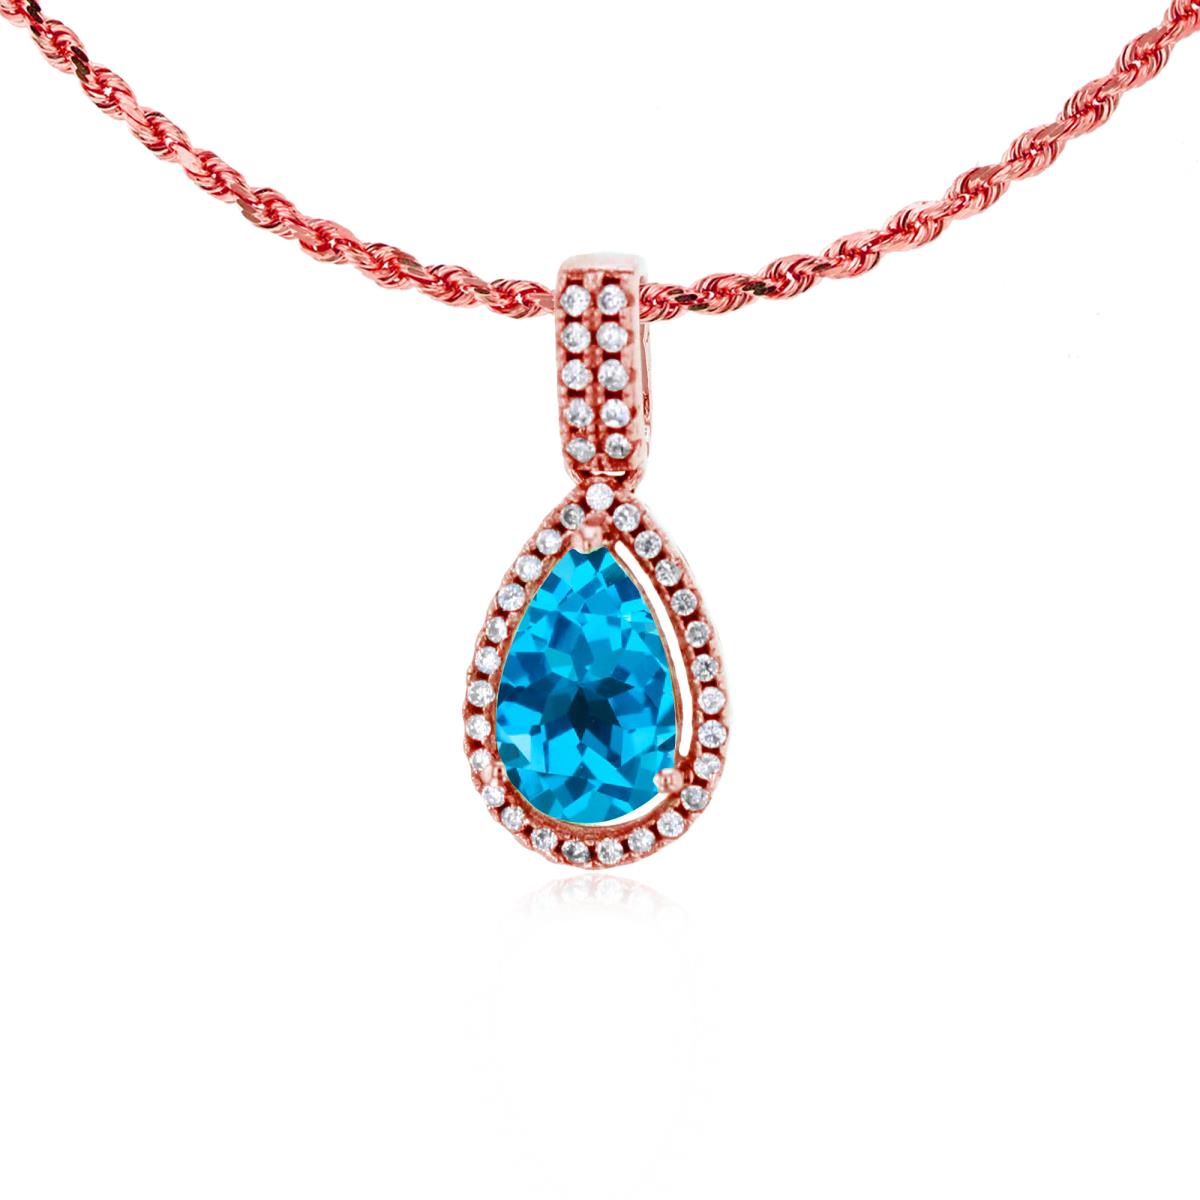 10K Rose Gold 8x5mm Pear Cut Swiss Blue Topaz & 0.11 CTTW Diamond Halo 18" Rope Chain Necklace